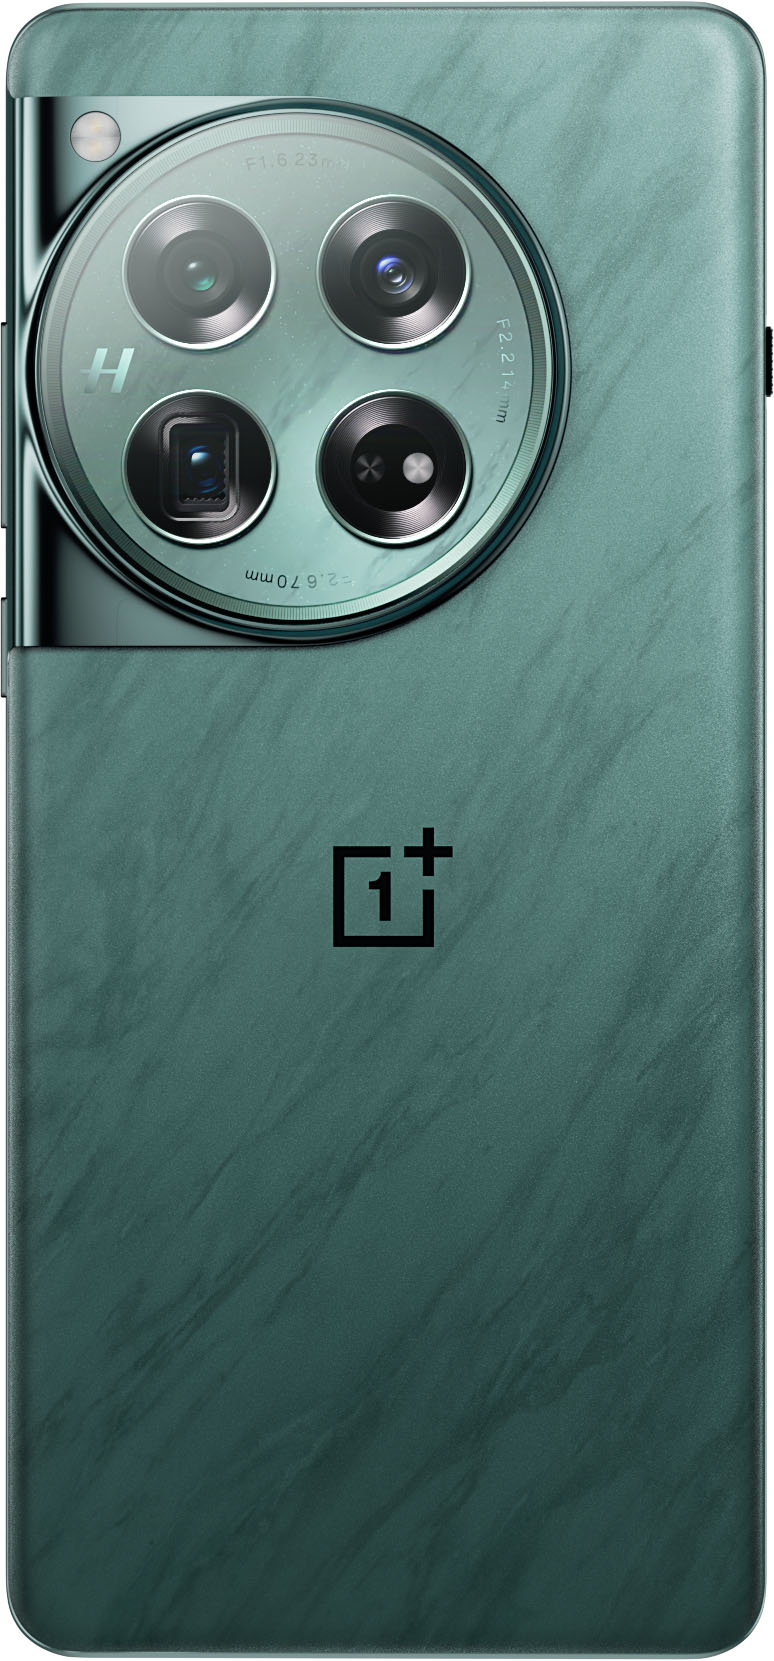 OnePlus 12 Announced for U.S. Release on February 6, Starting at $799.99